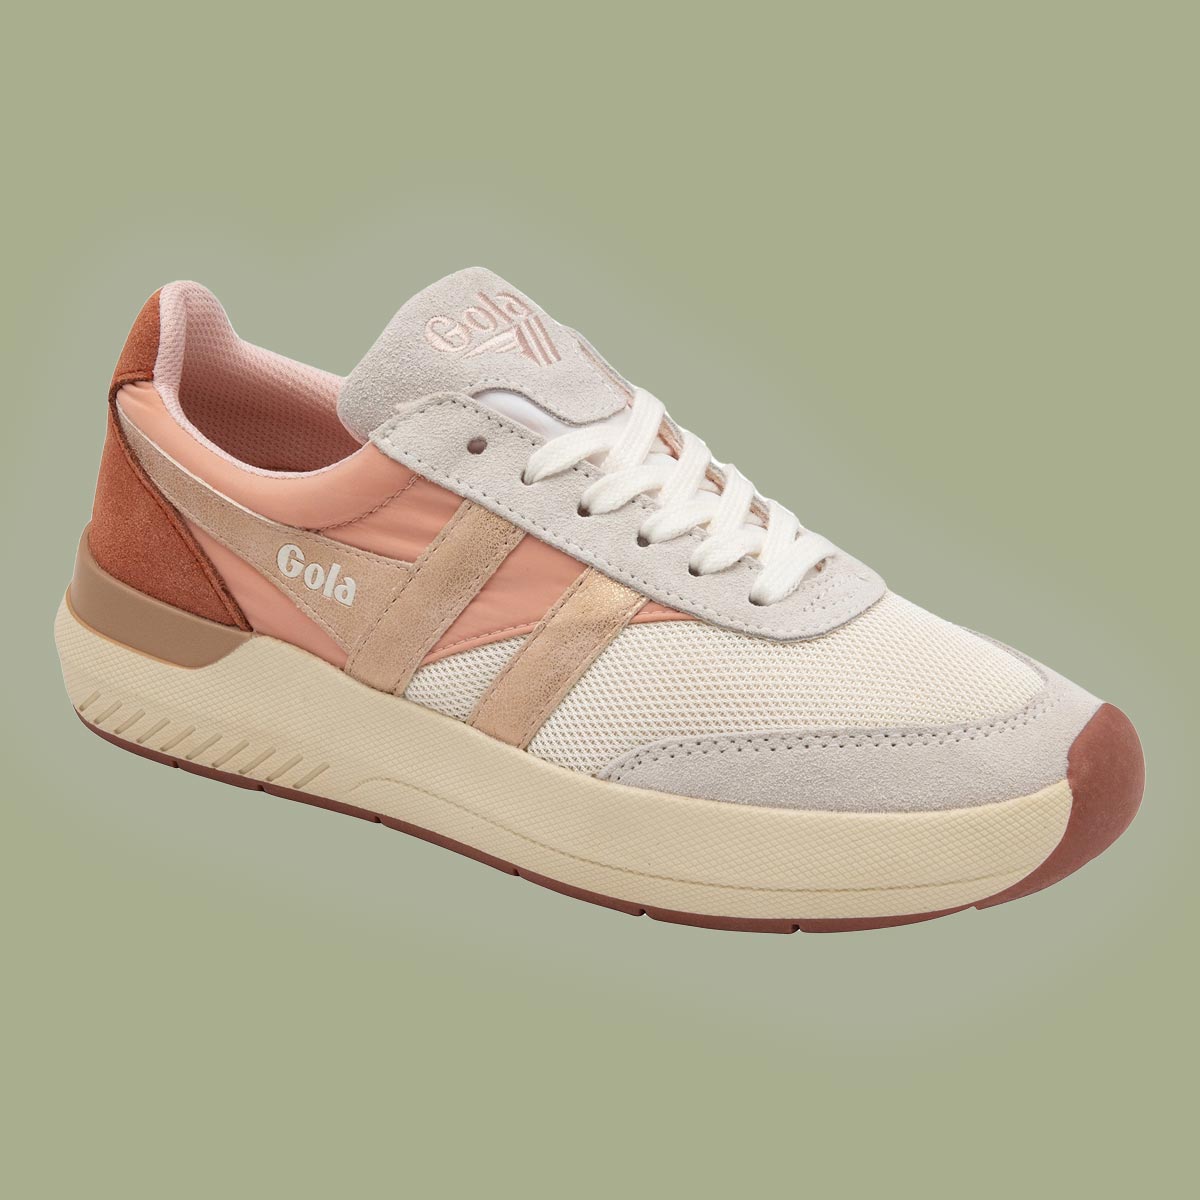 Sneaker Raven Mirror Off Wht Pearl Pink Rose Gold GOLA 1